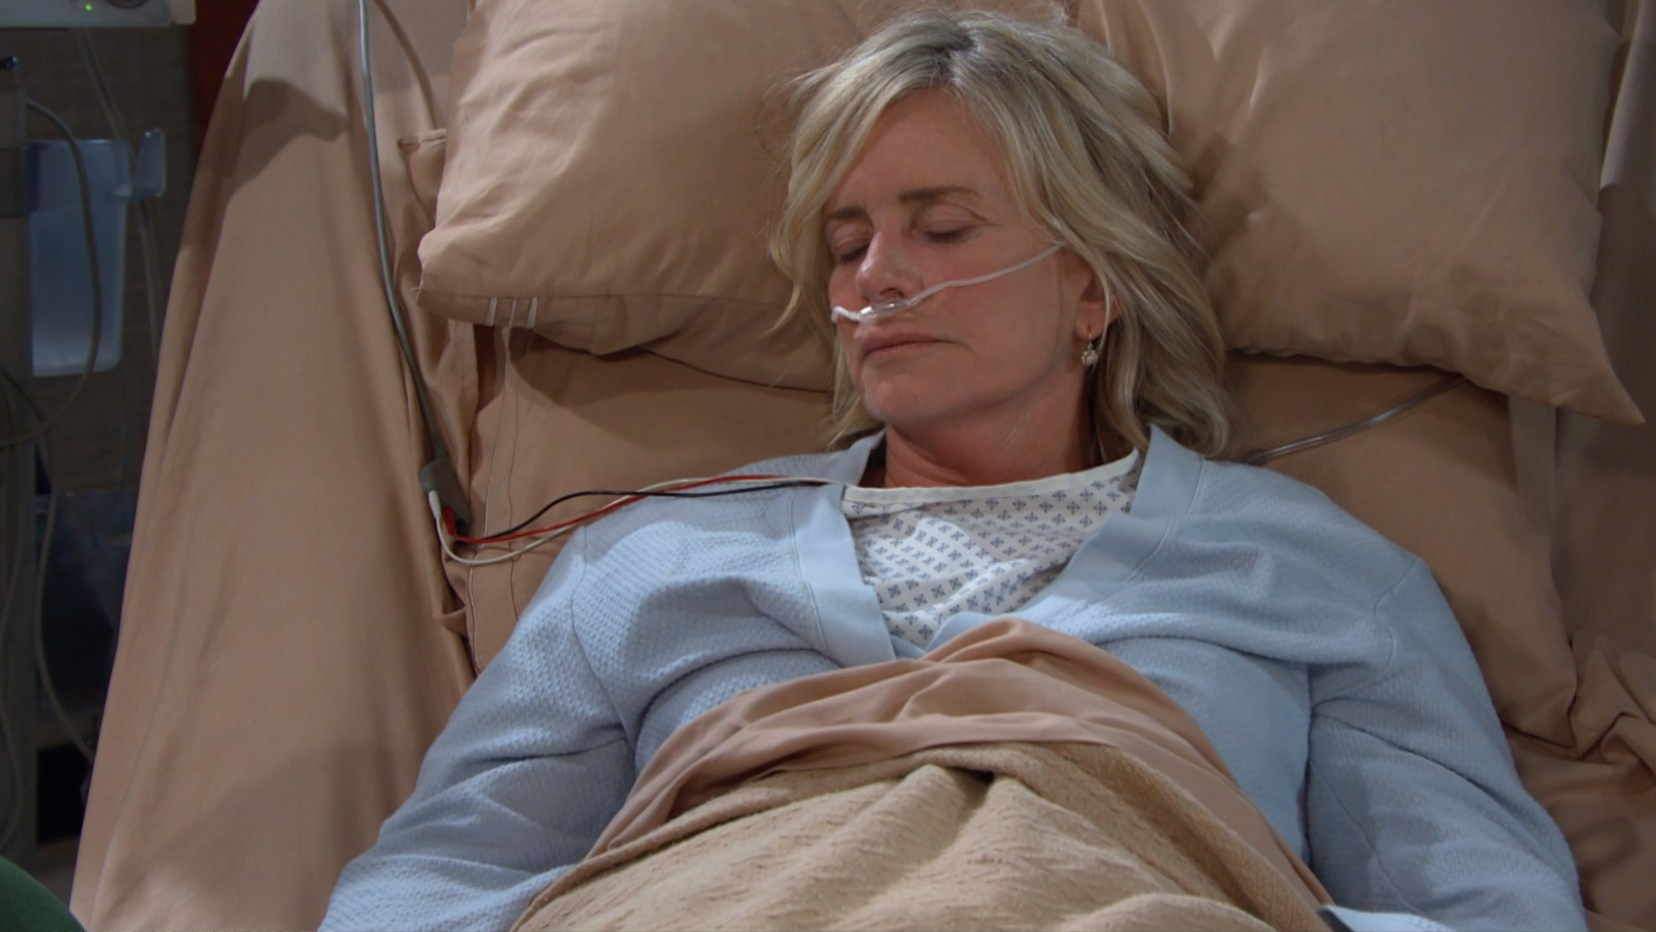 kayla dead days of our lives recaps